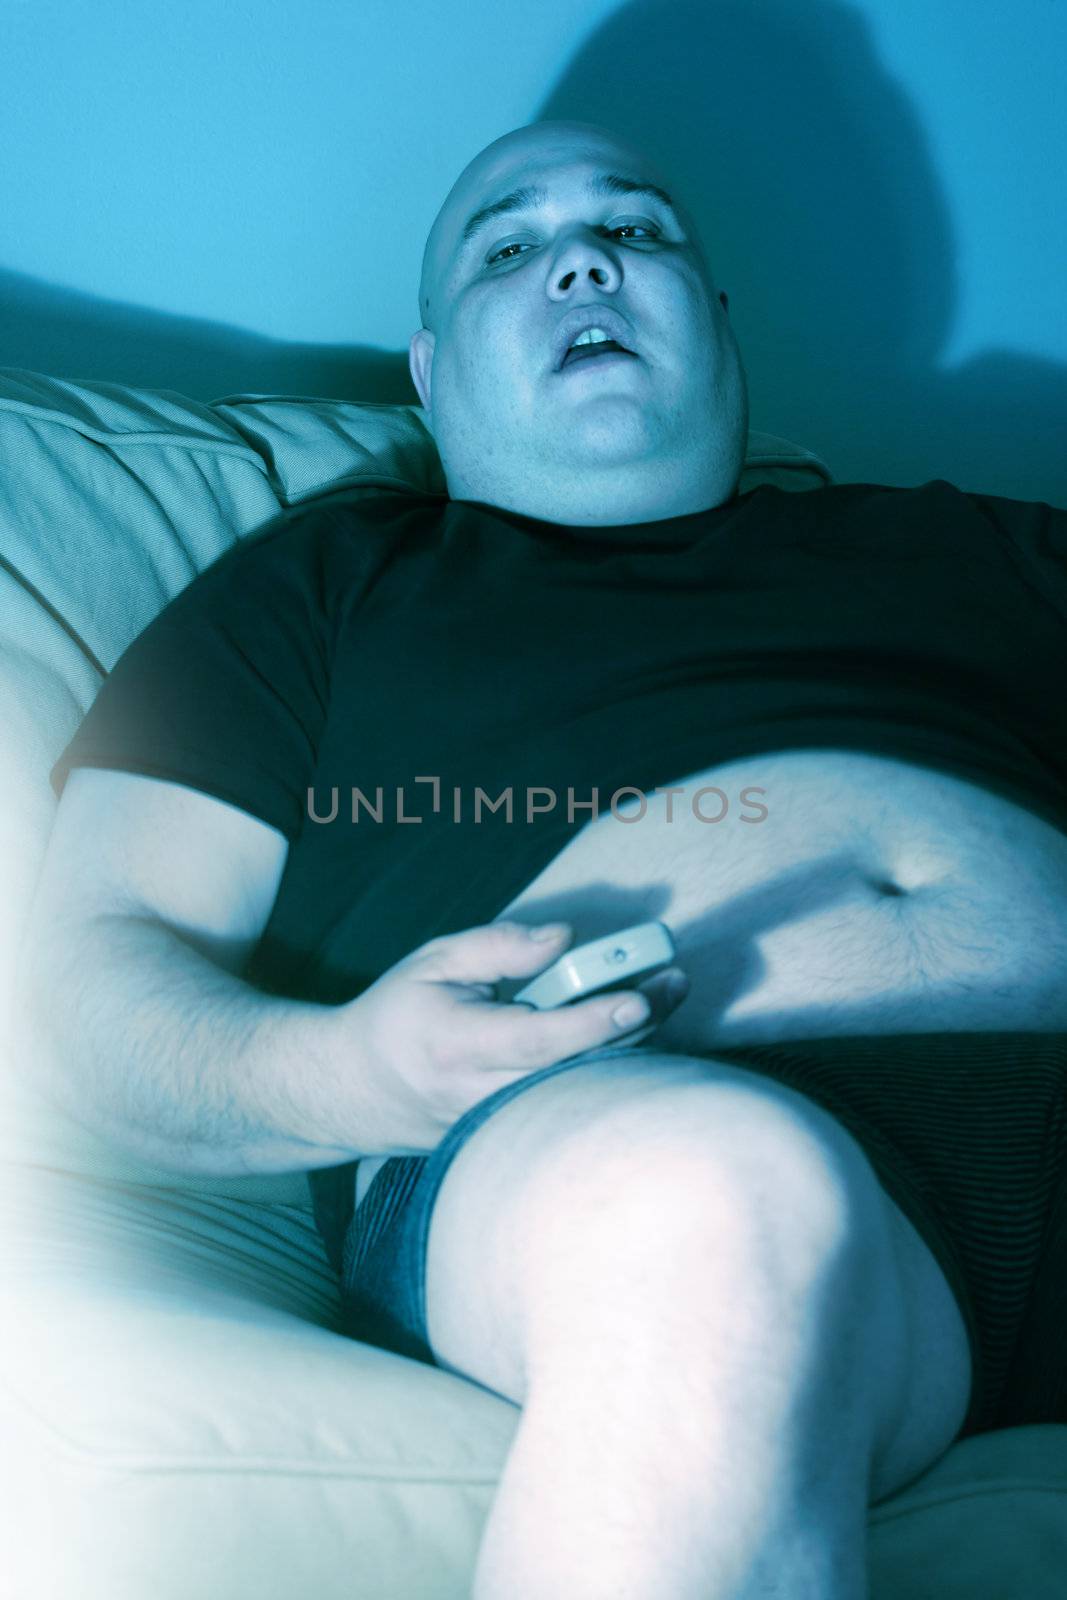 Lazy overweight male sitting on a couch watching television.  Harsh blue lighting from television with slow shutter speed to create TV watching atmosphere. Selective focus on the eyes.
